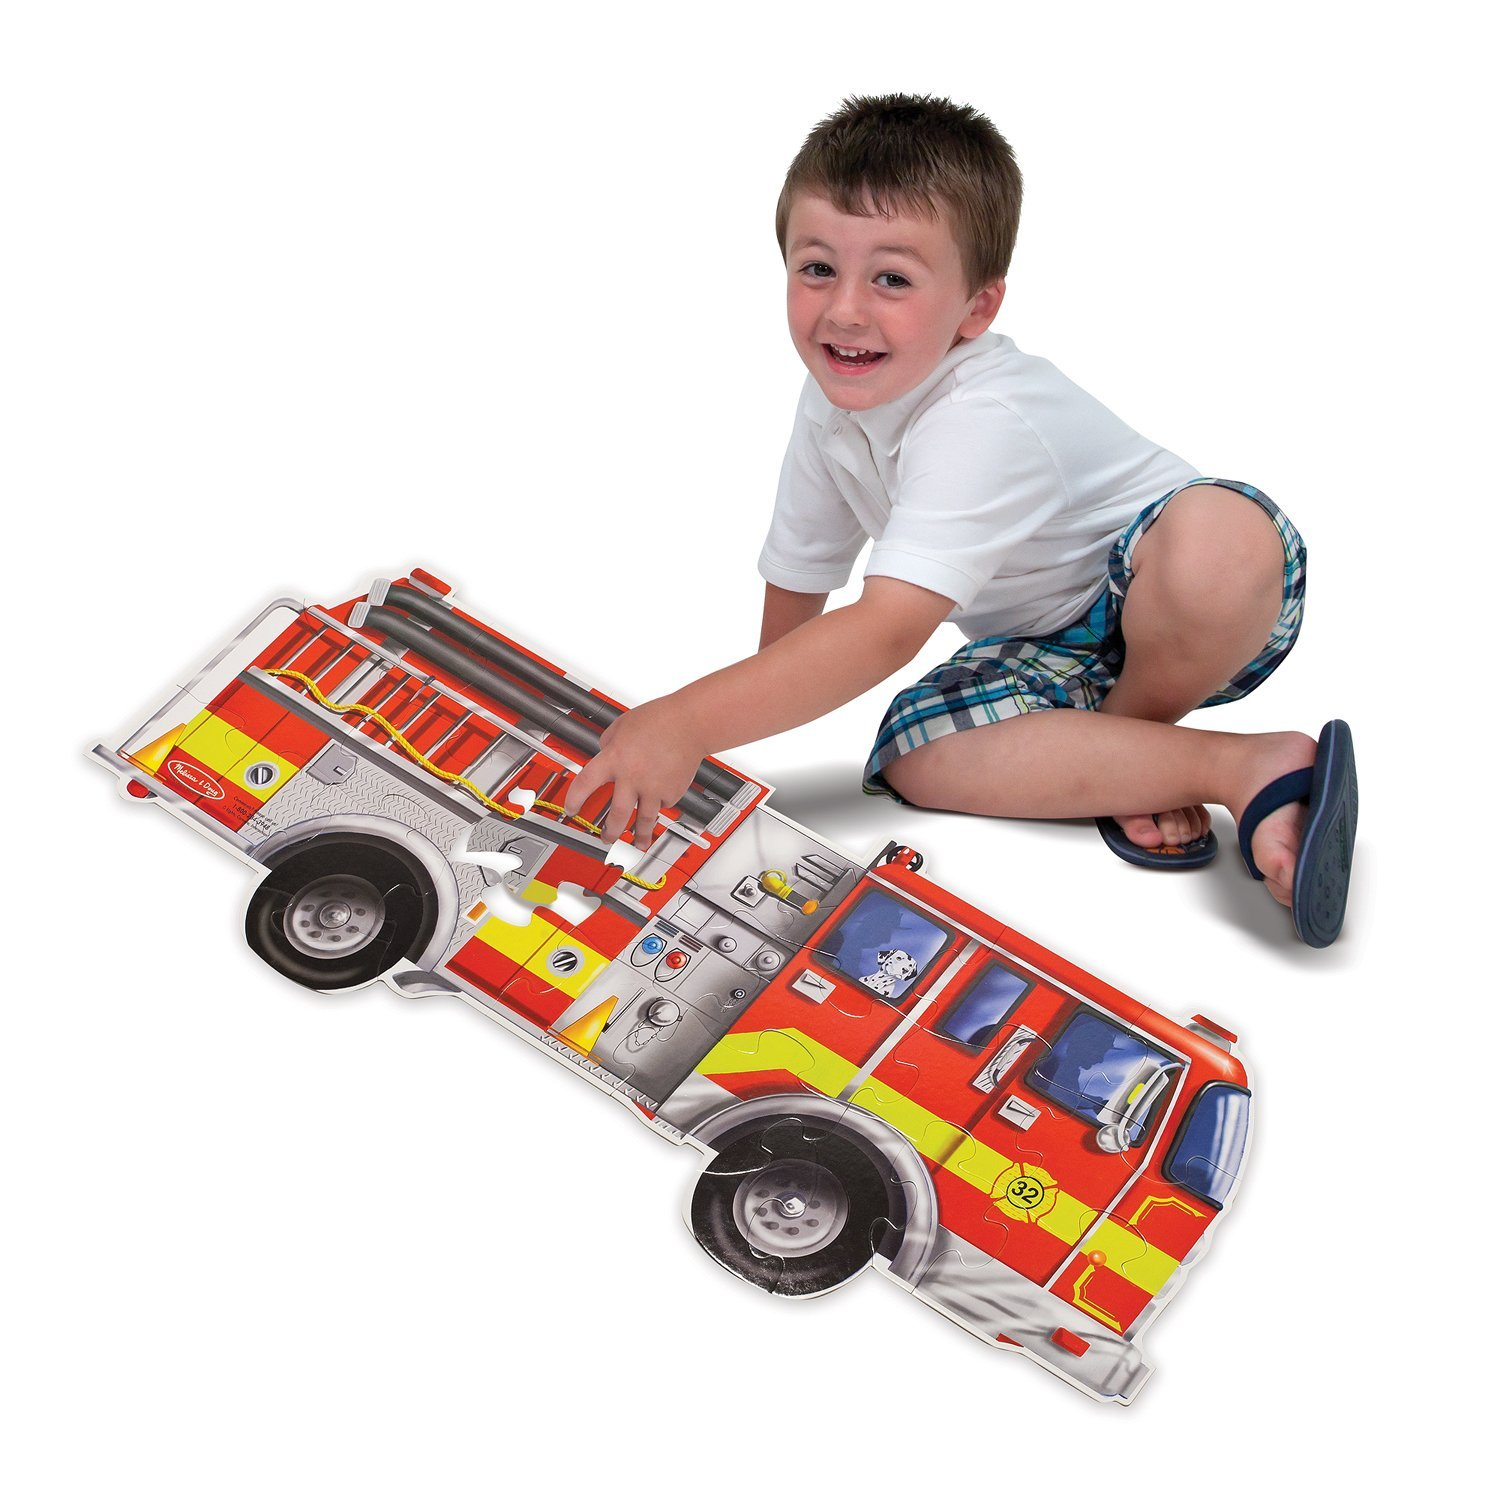 Melissa & Doug Giant Fire Truck Floor Puzzle Only $6.99 on Amazon! (Add-On Item)